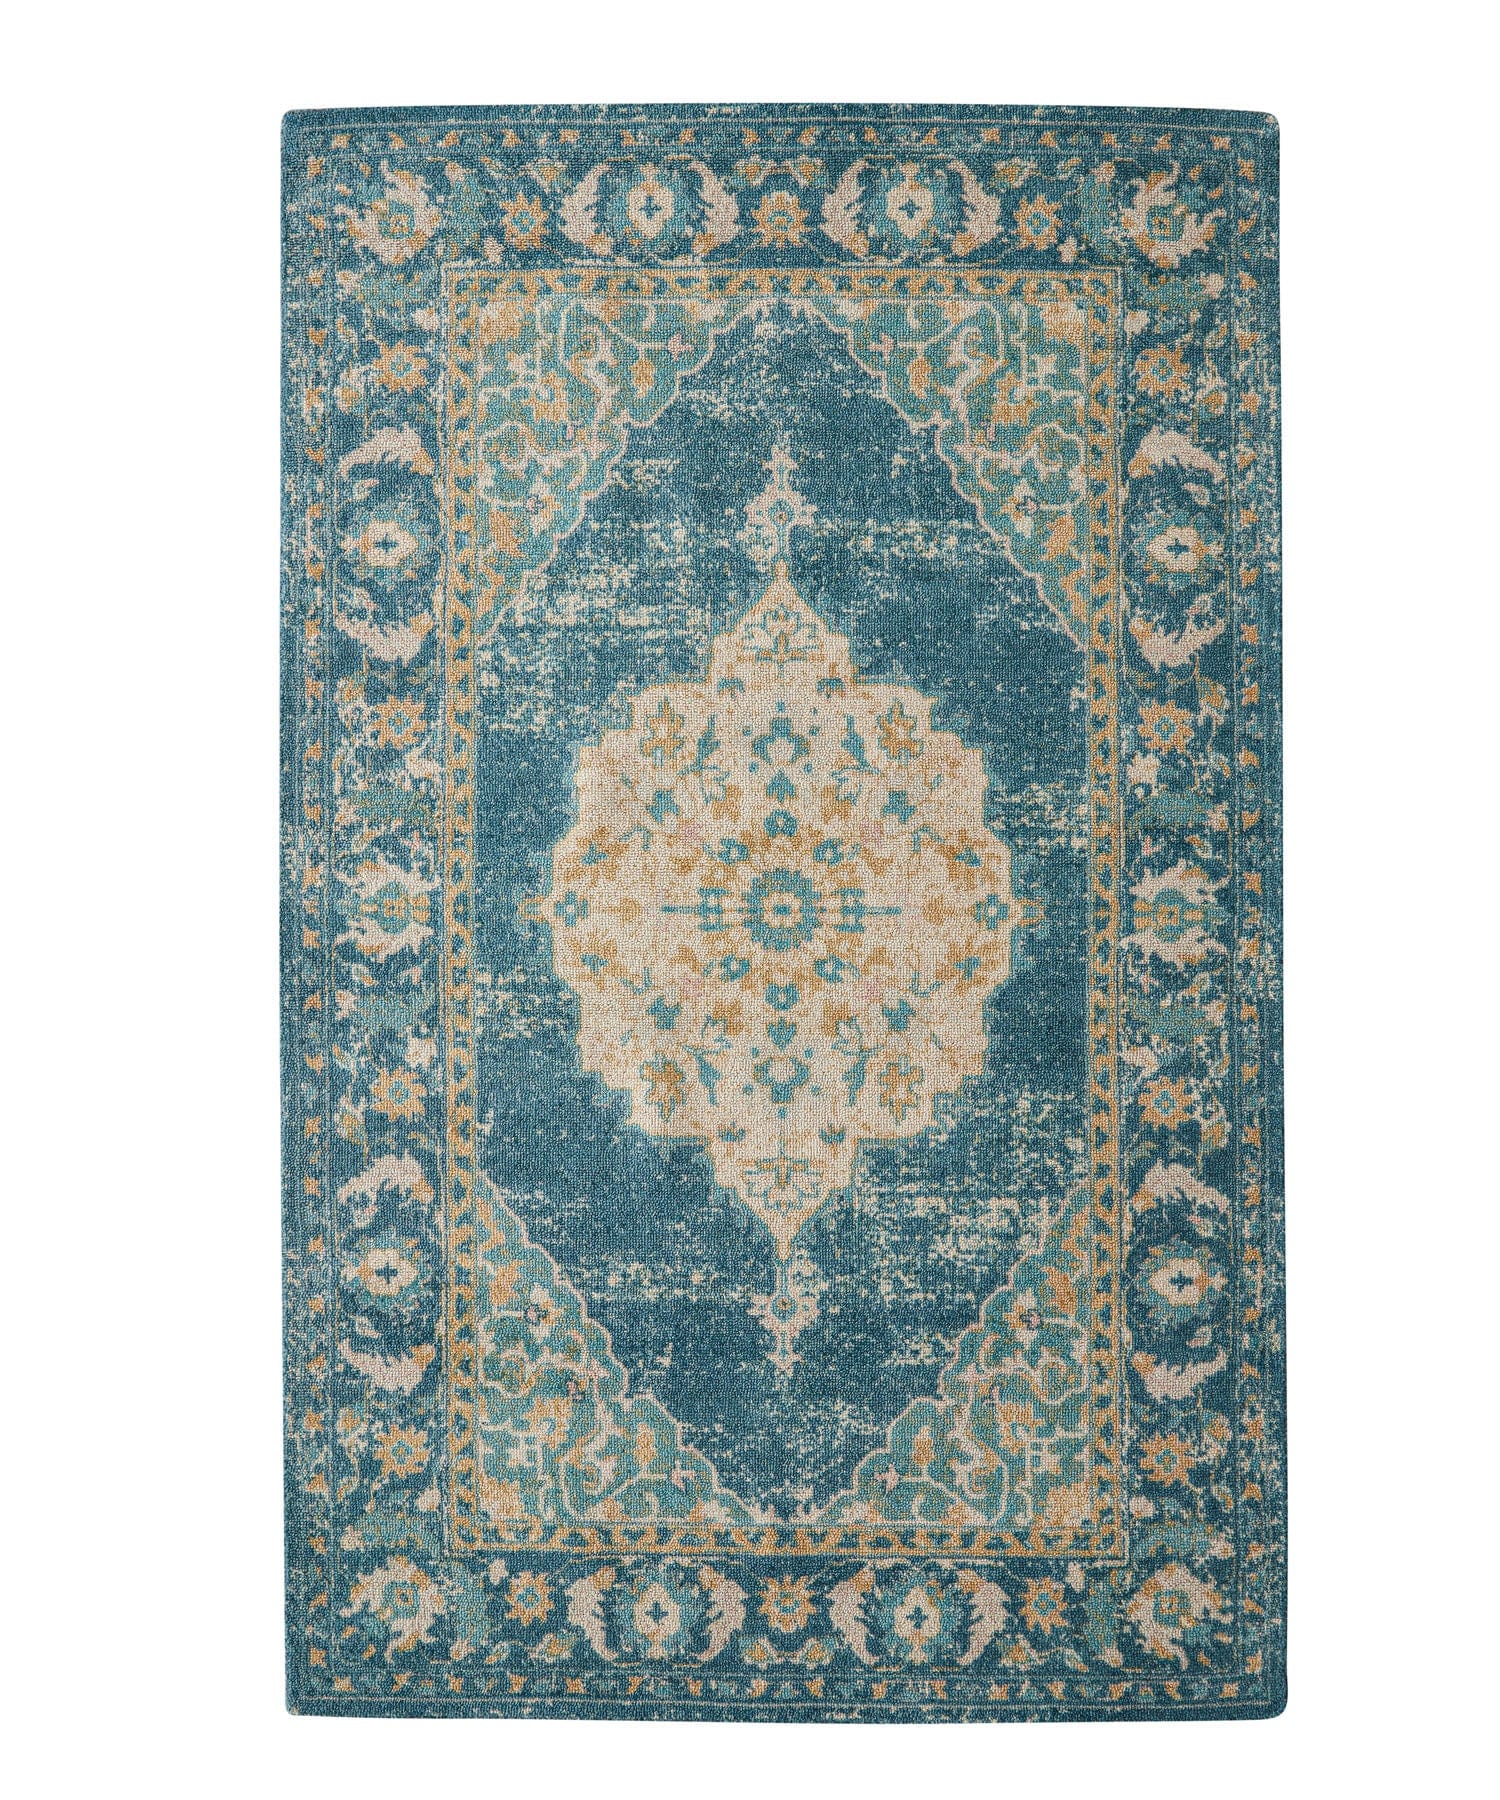 1 Rug of 1.2 M X 1.8 M ₹11199/-